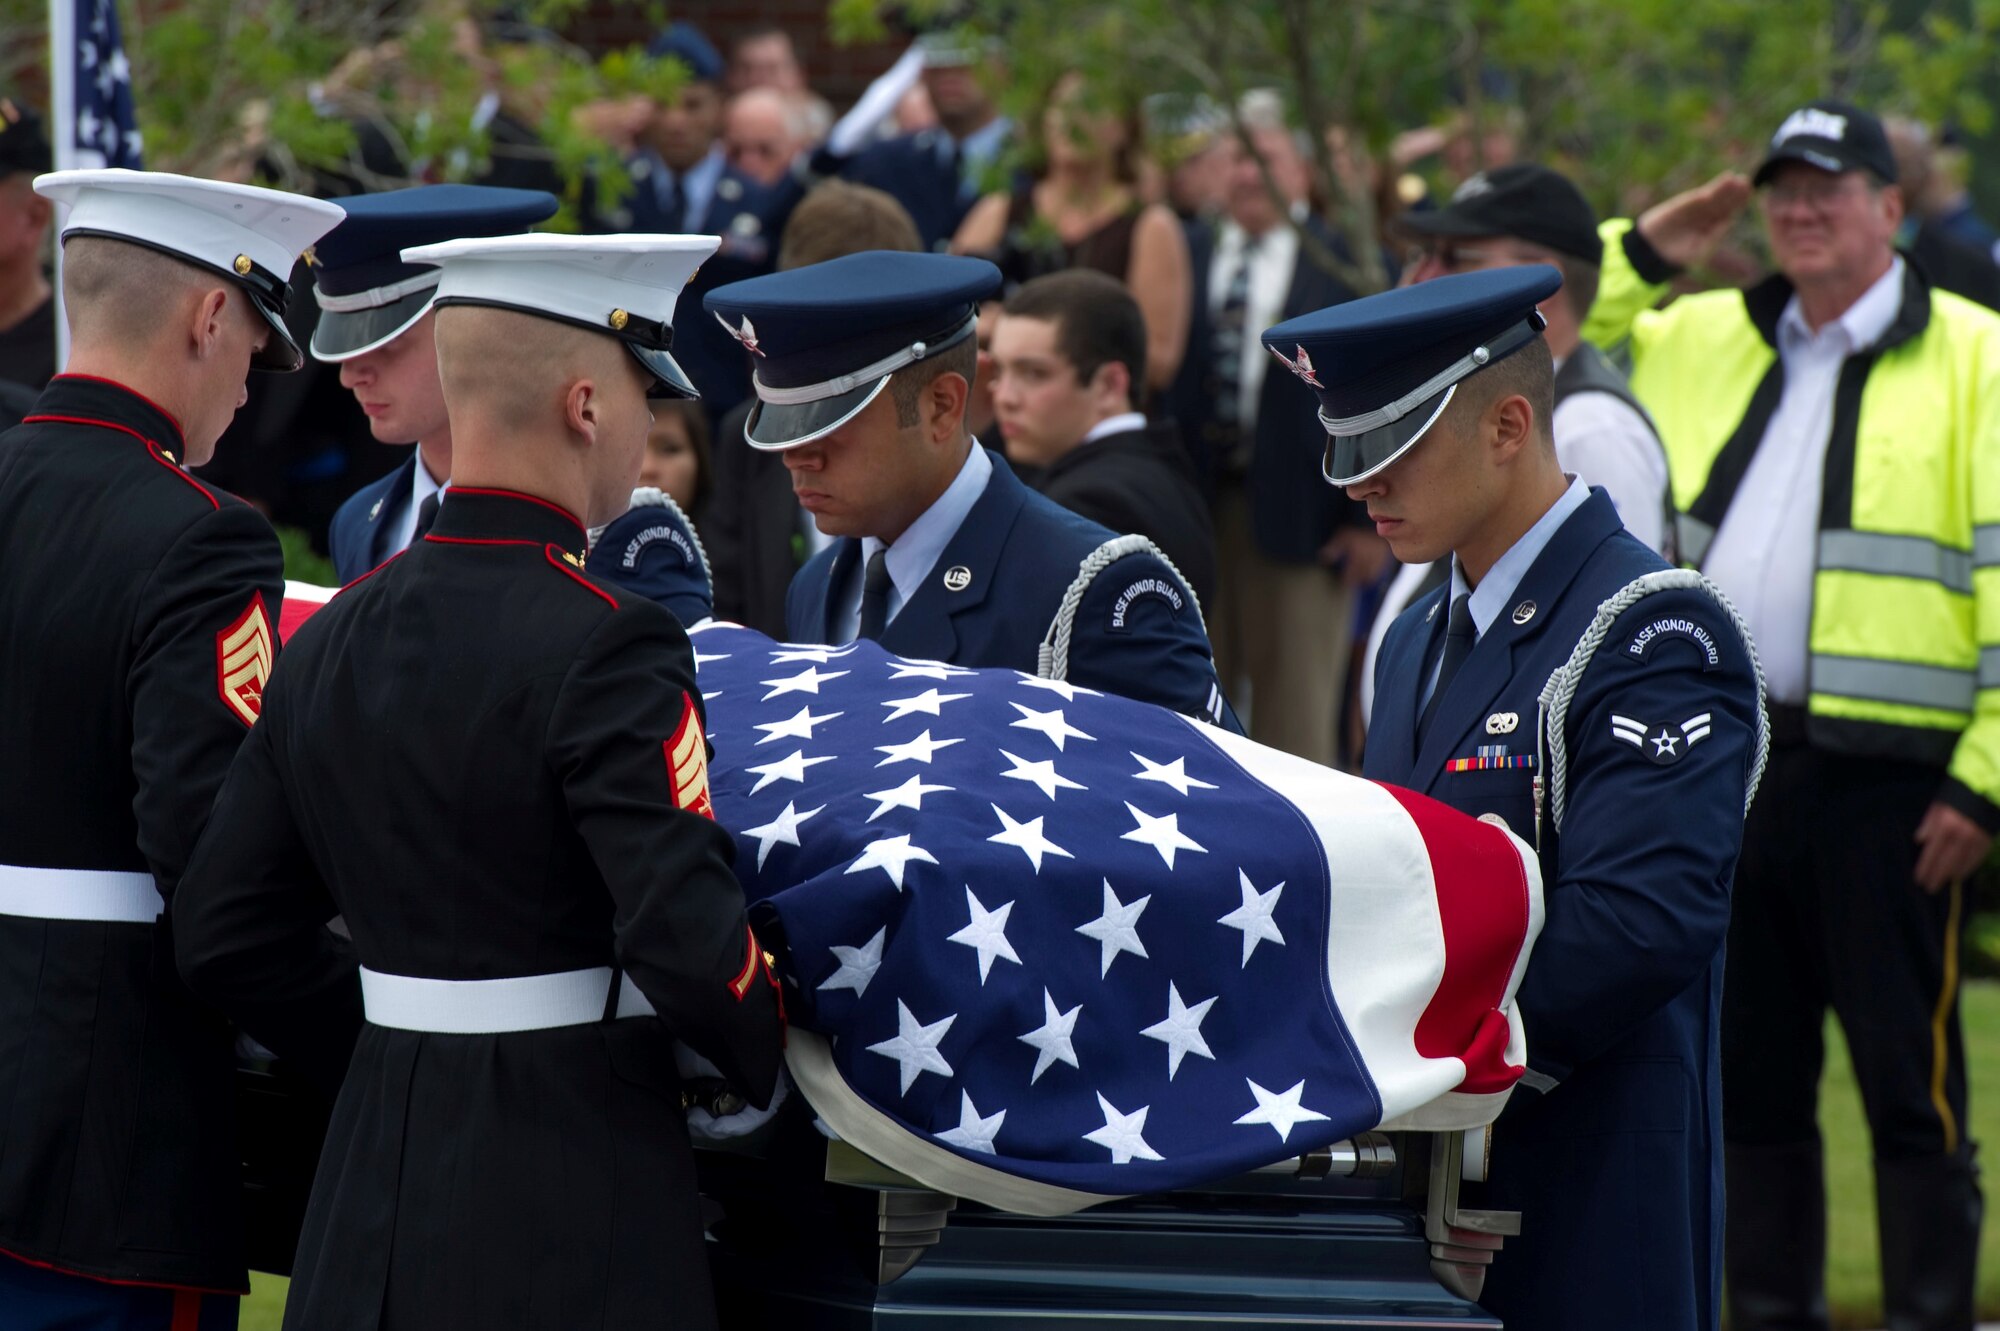 Pallbearers, made up of Airmen and Marines, carry the casket of retired U.S. Air Force Col. George “Bud” Day during his funeral service at Barrancas National Cemetery on Naval Air Station Pensacola, Fla., Aug. 1, 2013. Day, a Medal of Honor recipient and combat pilot with service in World War II, Korea and Vietnam, passed away July 27 at the age of 88. (U.S. Air Force Photo/Staff Sgt. John Bainter) 